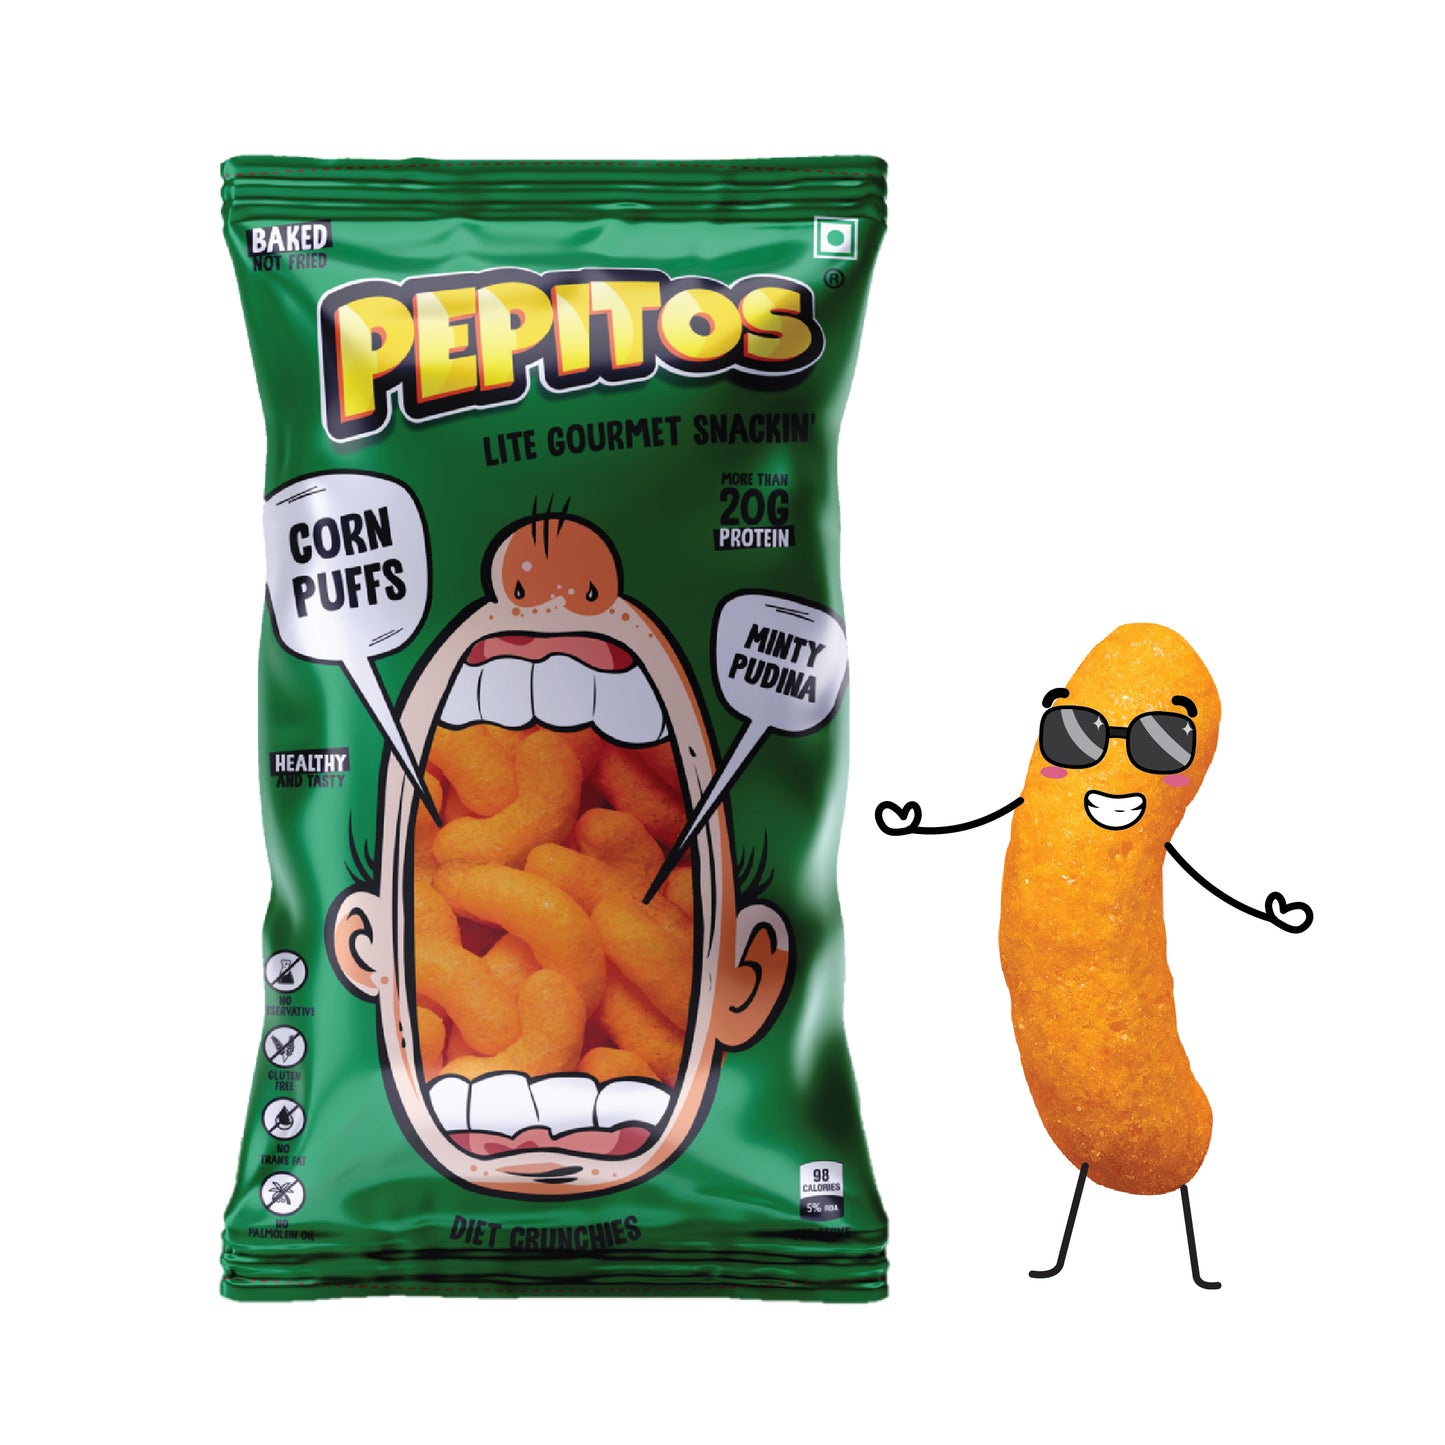 Pepitos Corn Puffs - Minty Pudina - XXL Party Pack -140g